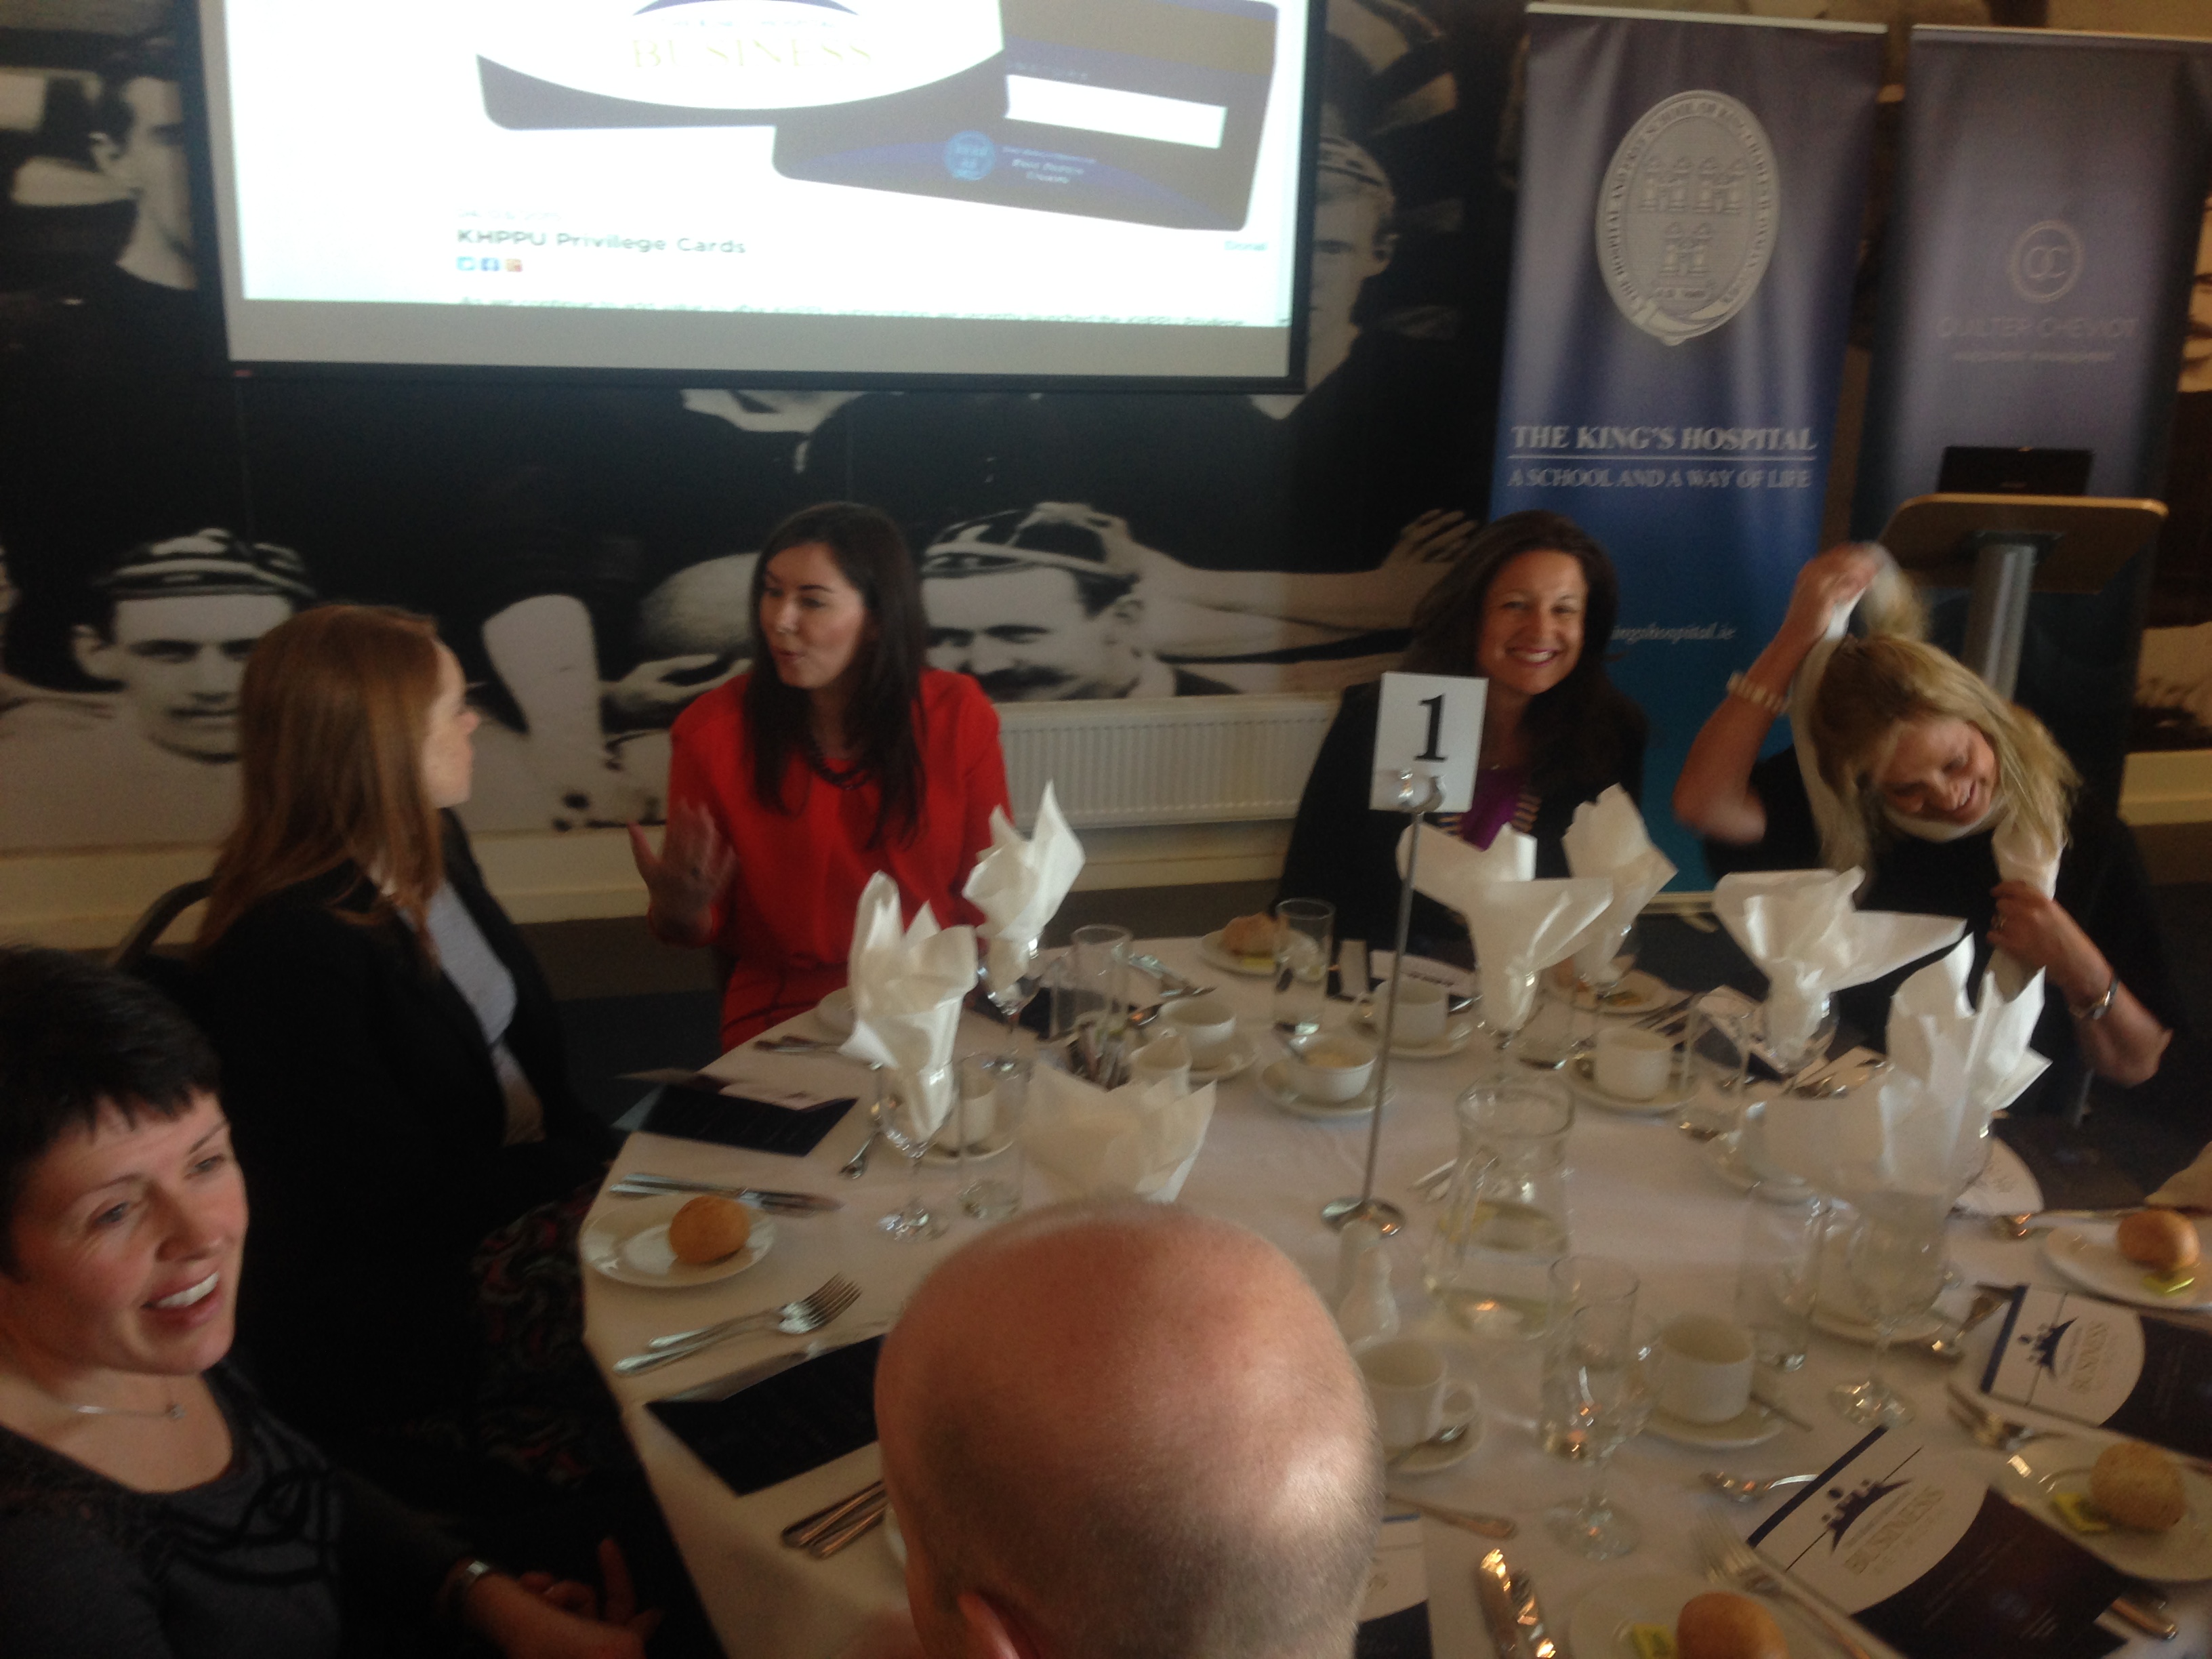 Nicola Byrne guest speaker at The KHPPU Business Network Lunch